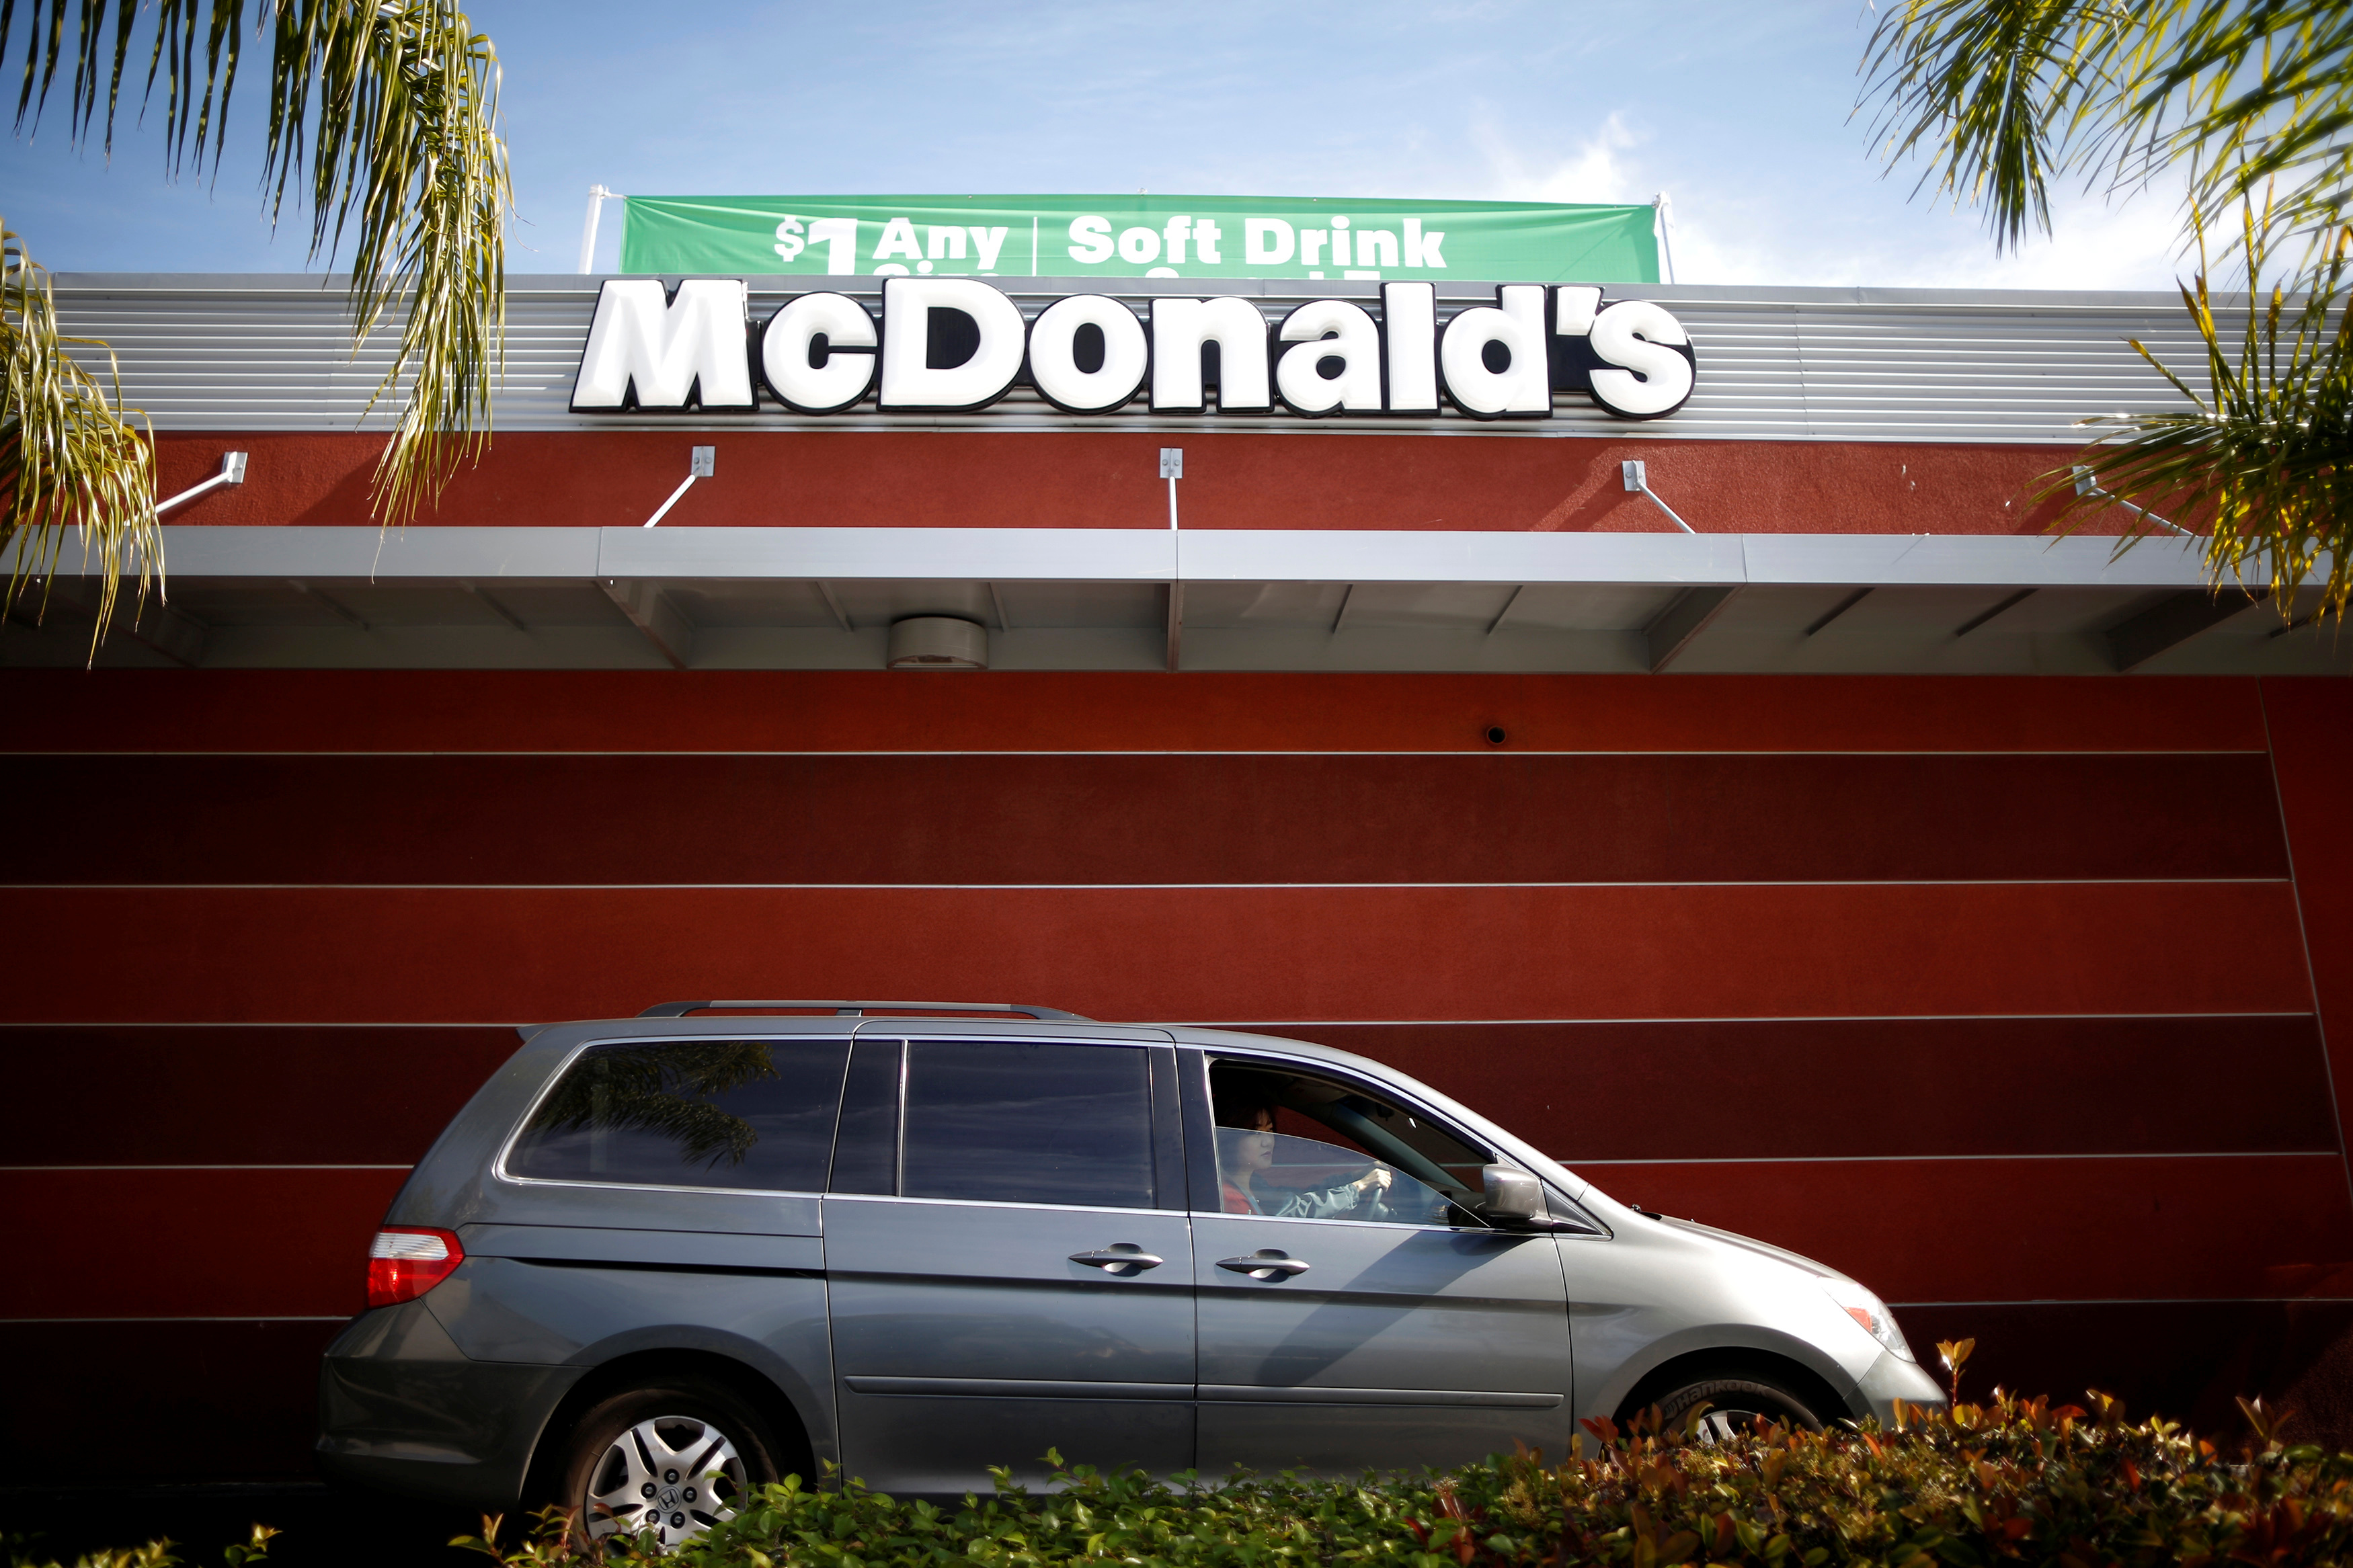 People wait at a McDonald's drive through in Los Angeles, California March 17, 2015. REUTERS/Lucy Nicholson